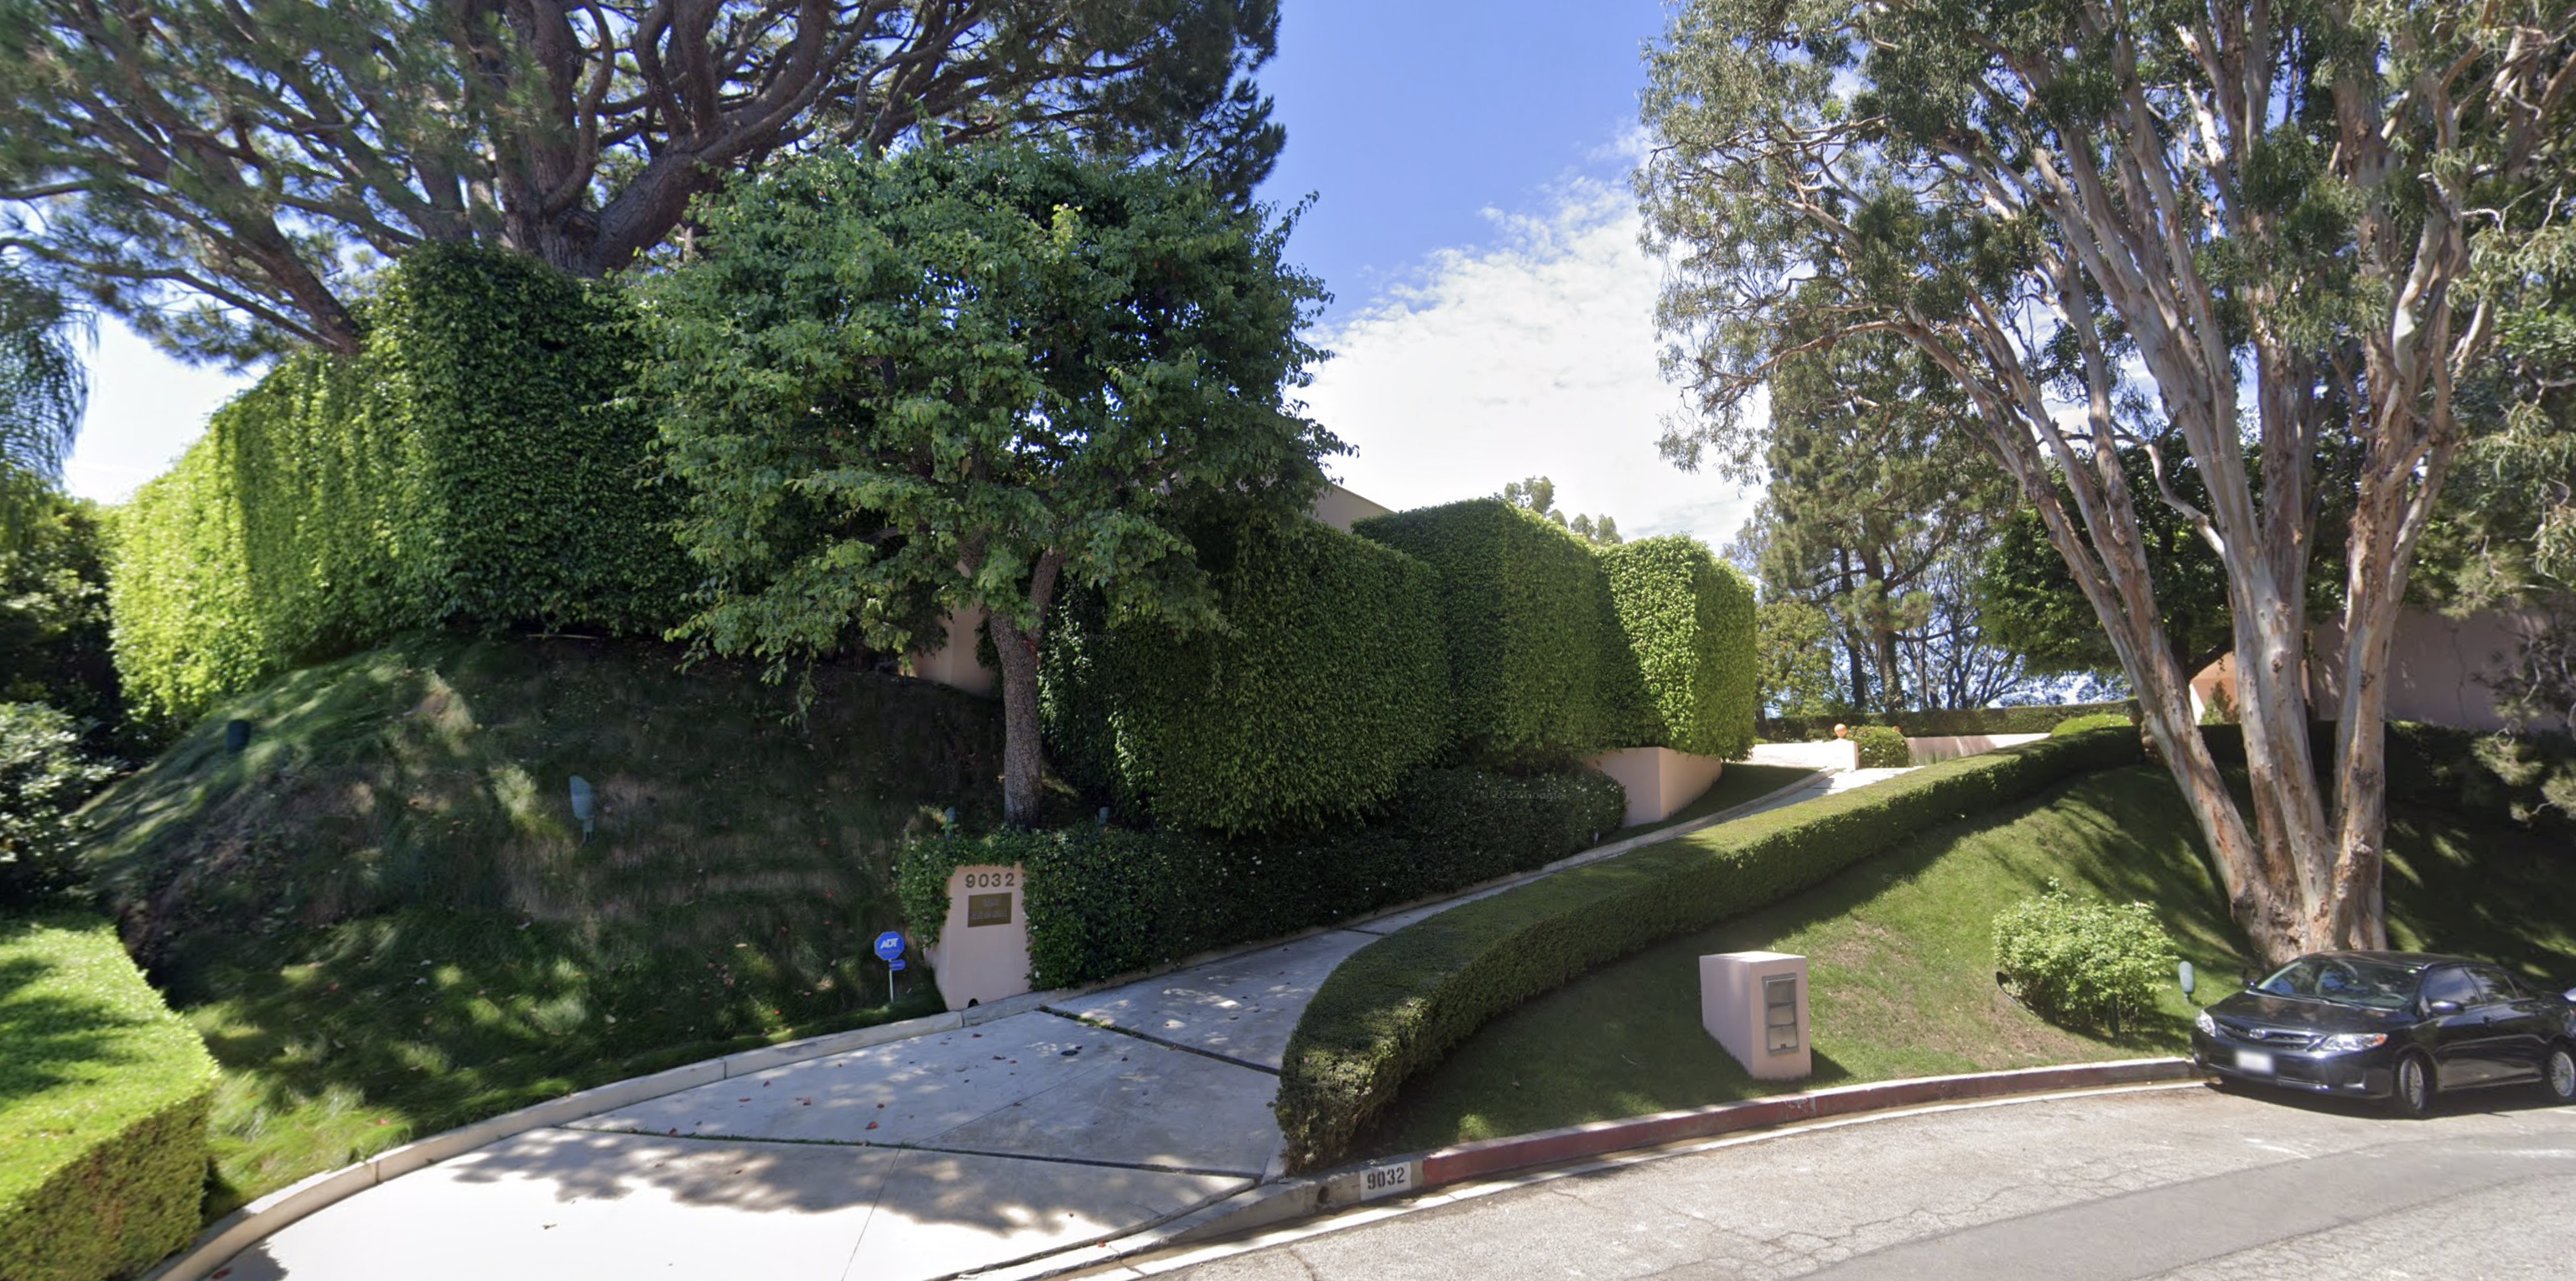 A street view of the property at 9032 Thrasher Avenue in Hollywood Hills (Google Maps)